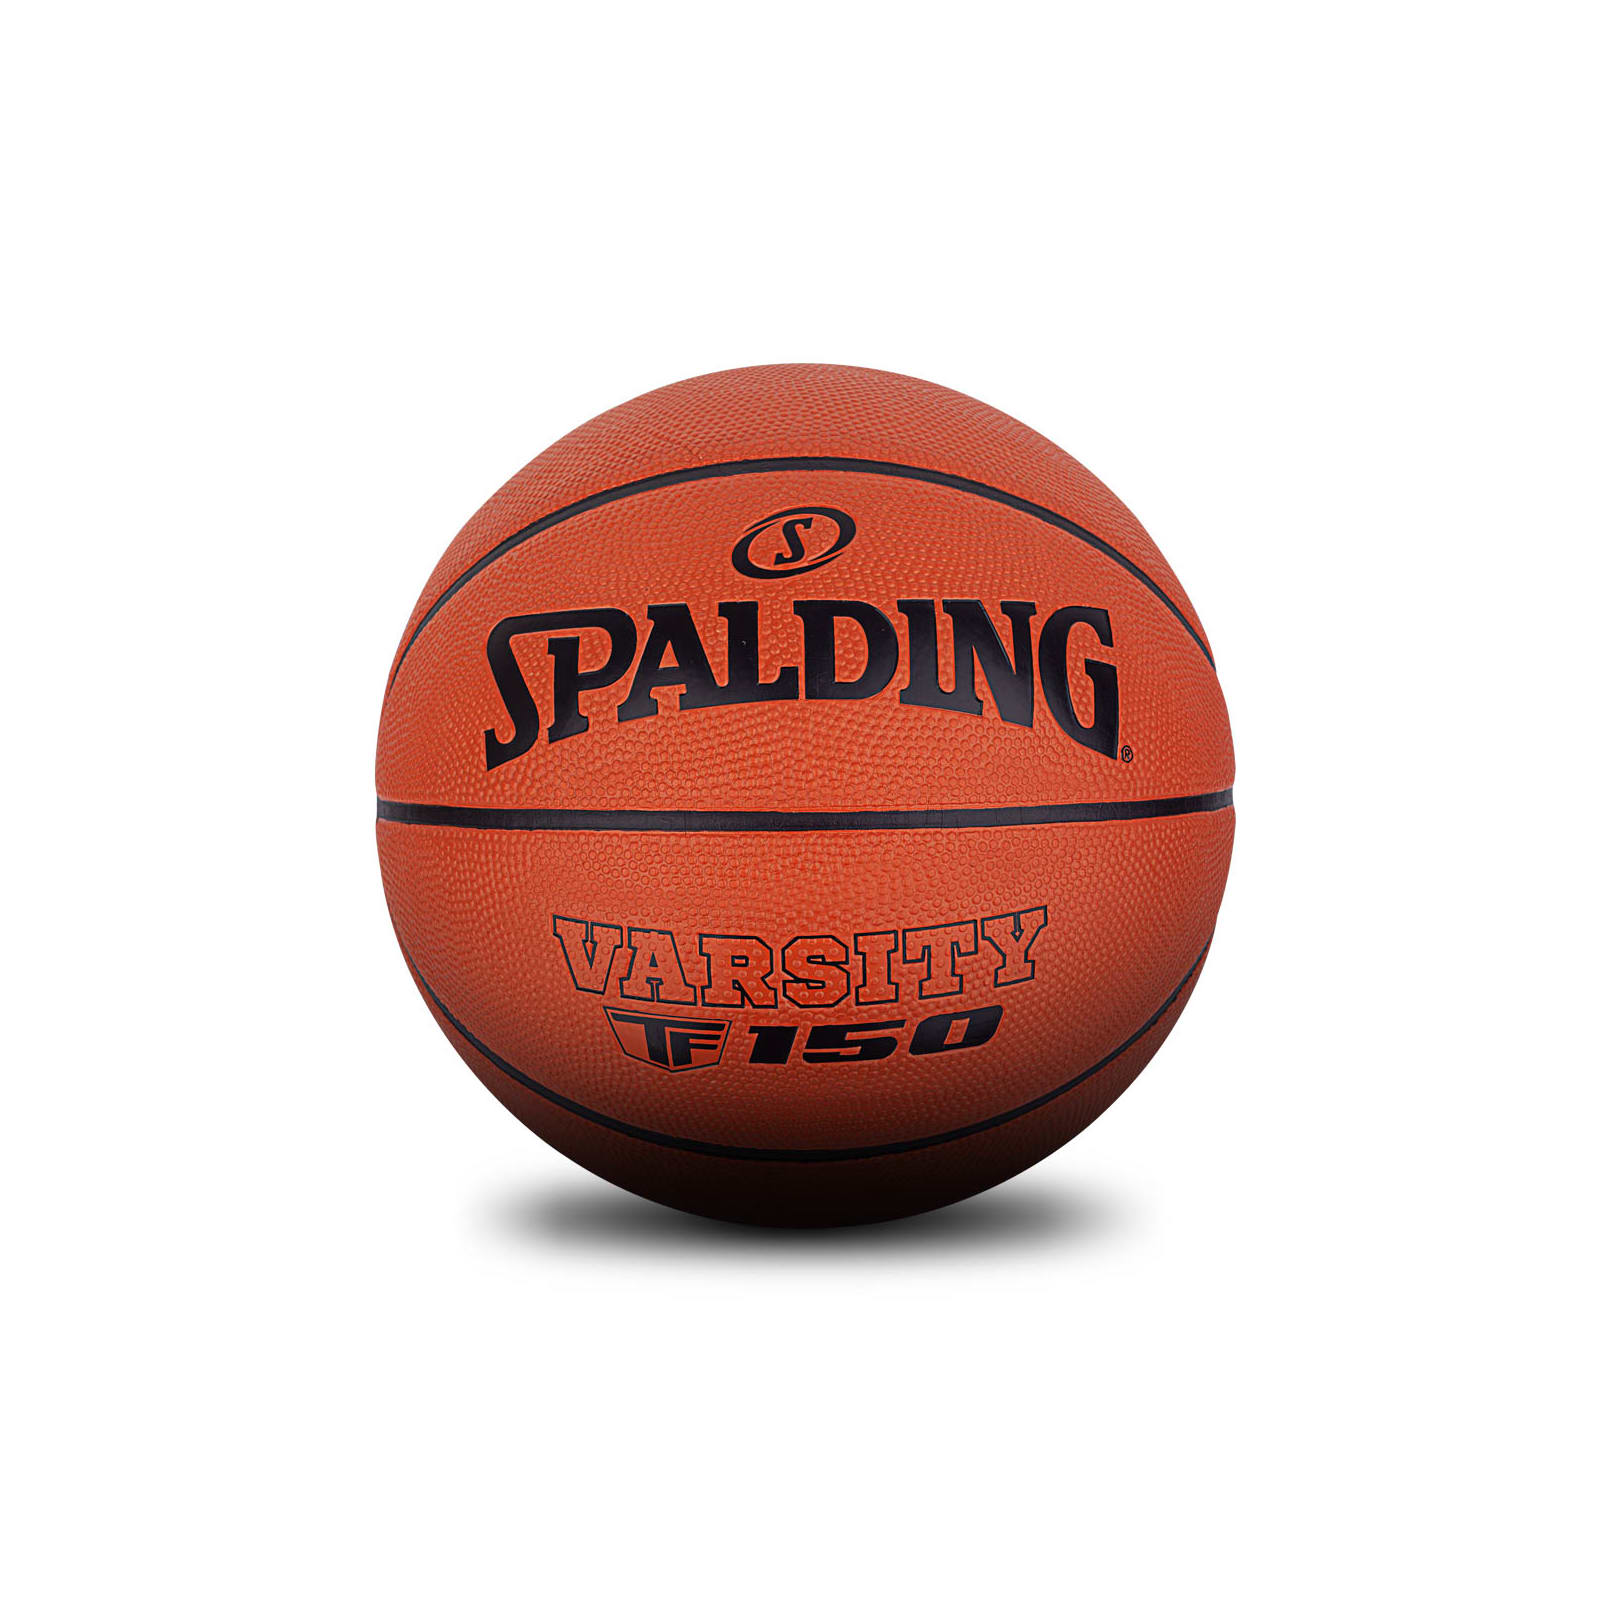 Spalding TF150 Basketball Outdoor Performance Ball Durable Rubber Size 5 6 7 